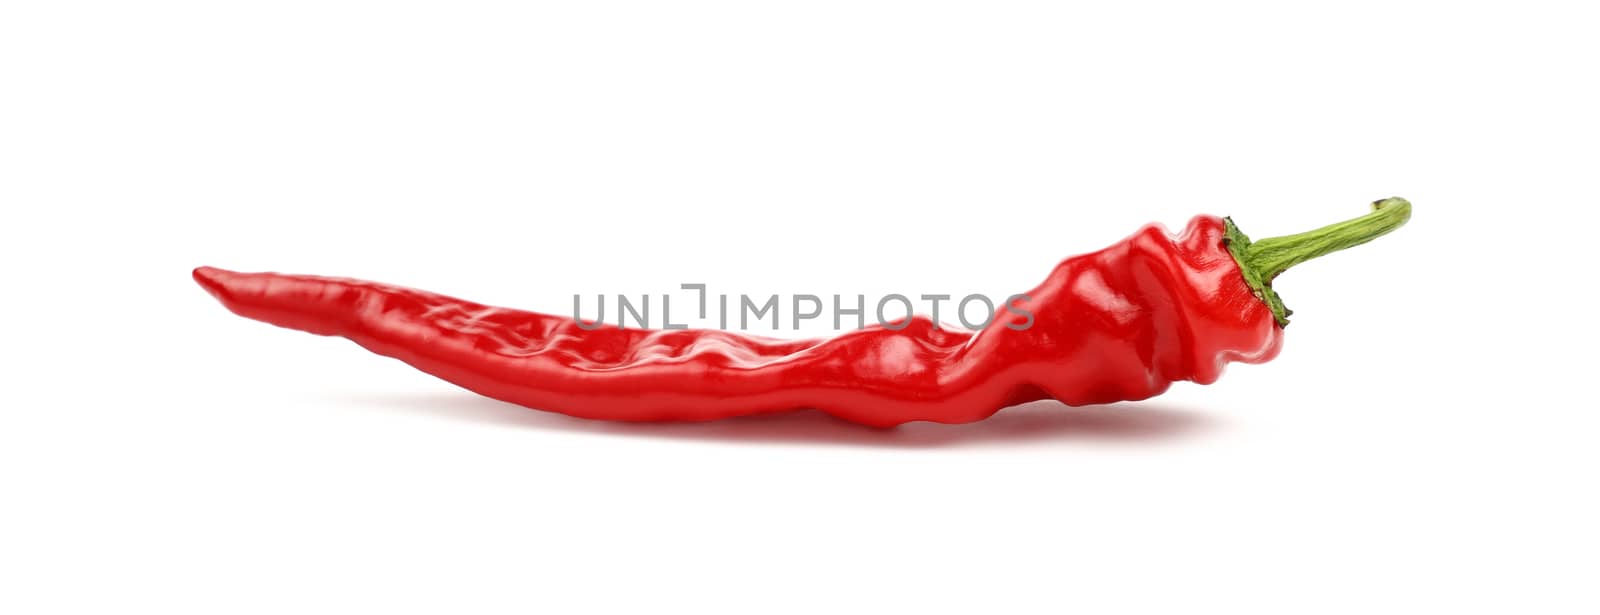 Red hot chili pepper close up isolated on white by BreakingTheWalls